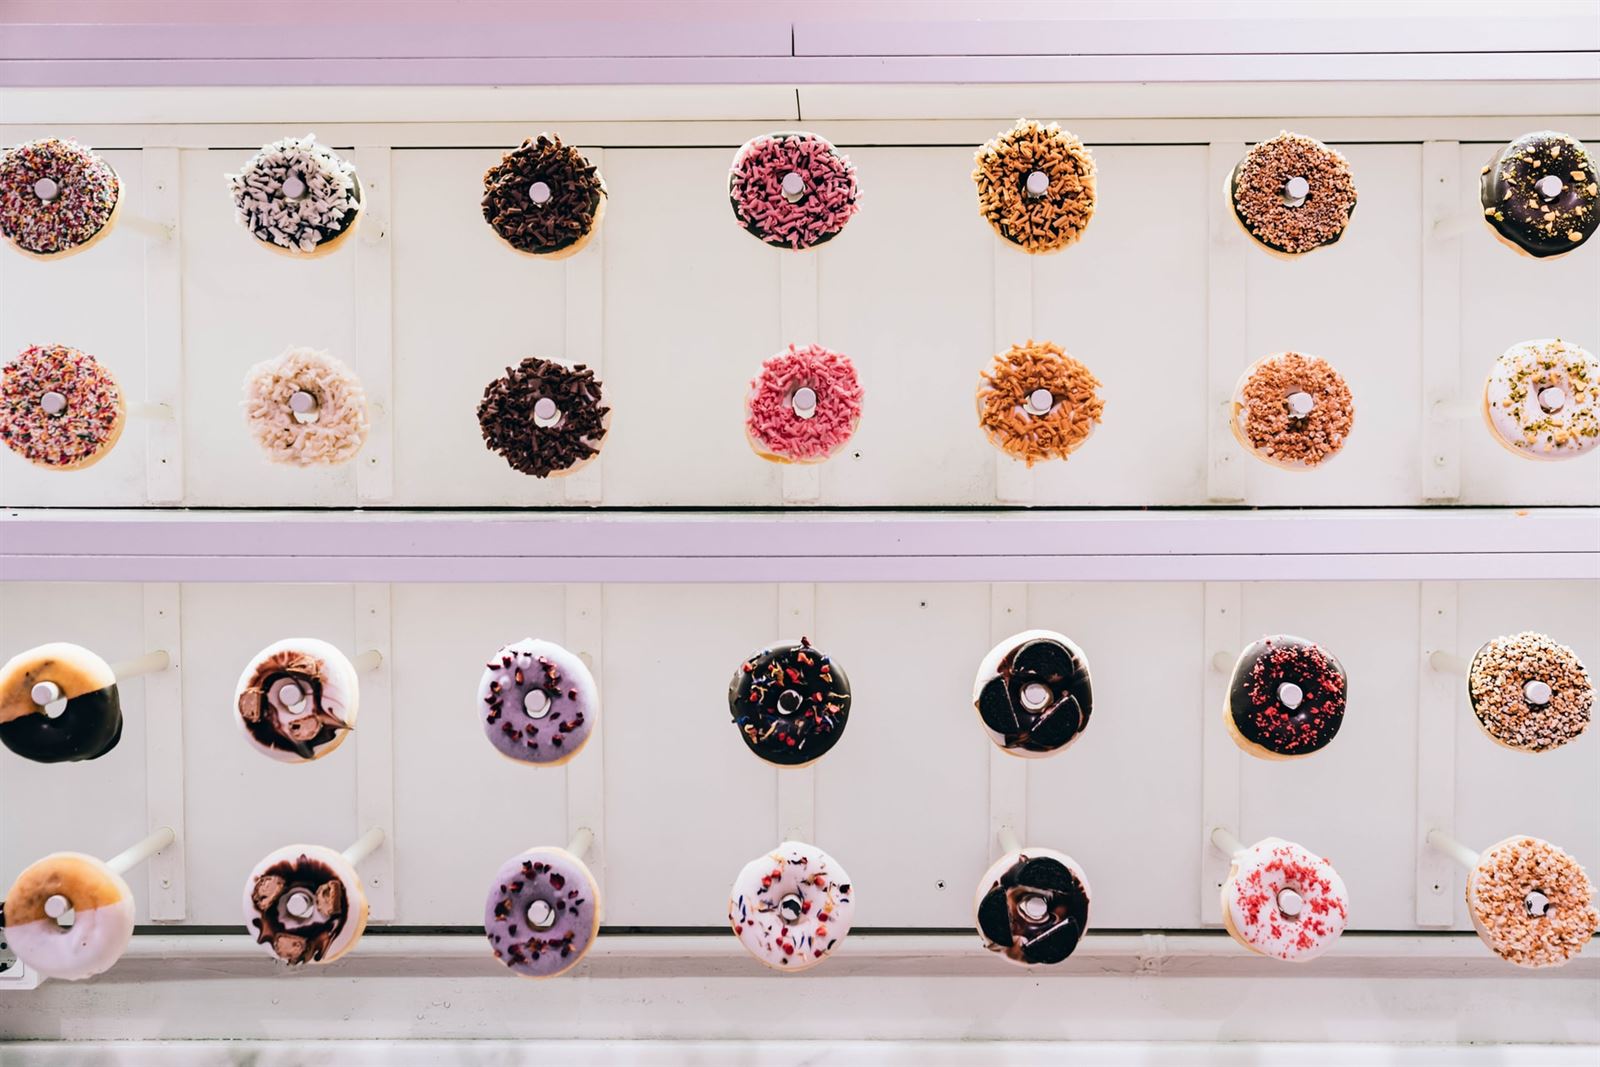 Doughnut wall holding plenty of  tasty doughnuts of different flavours at wedding